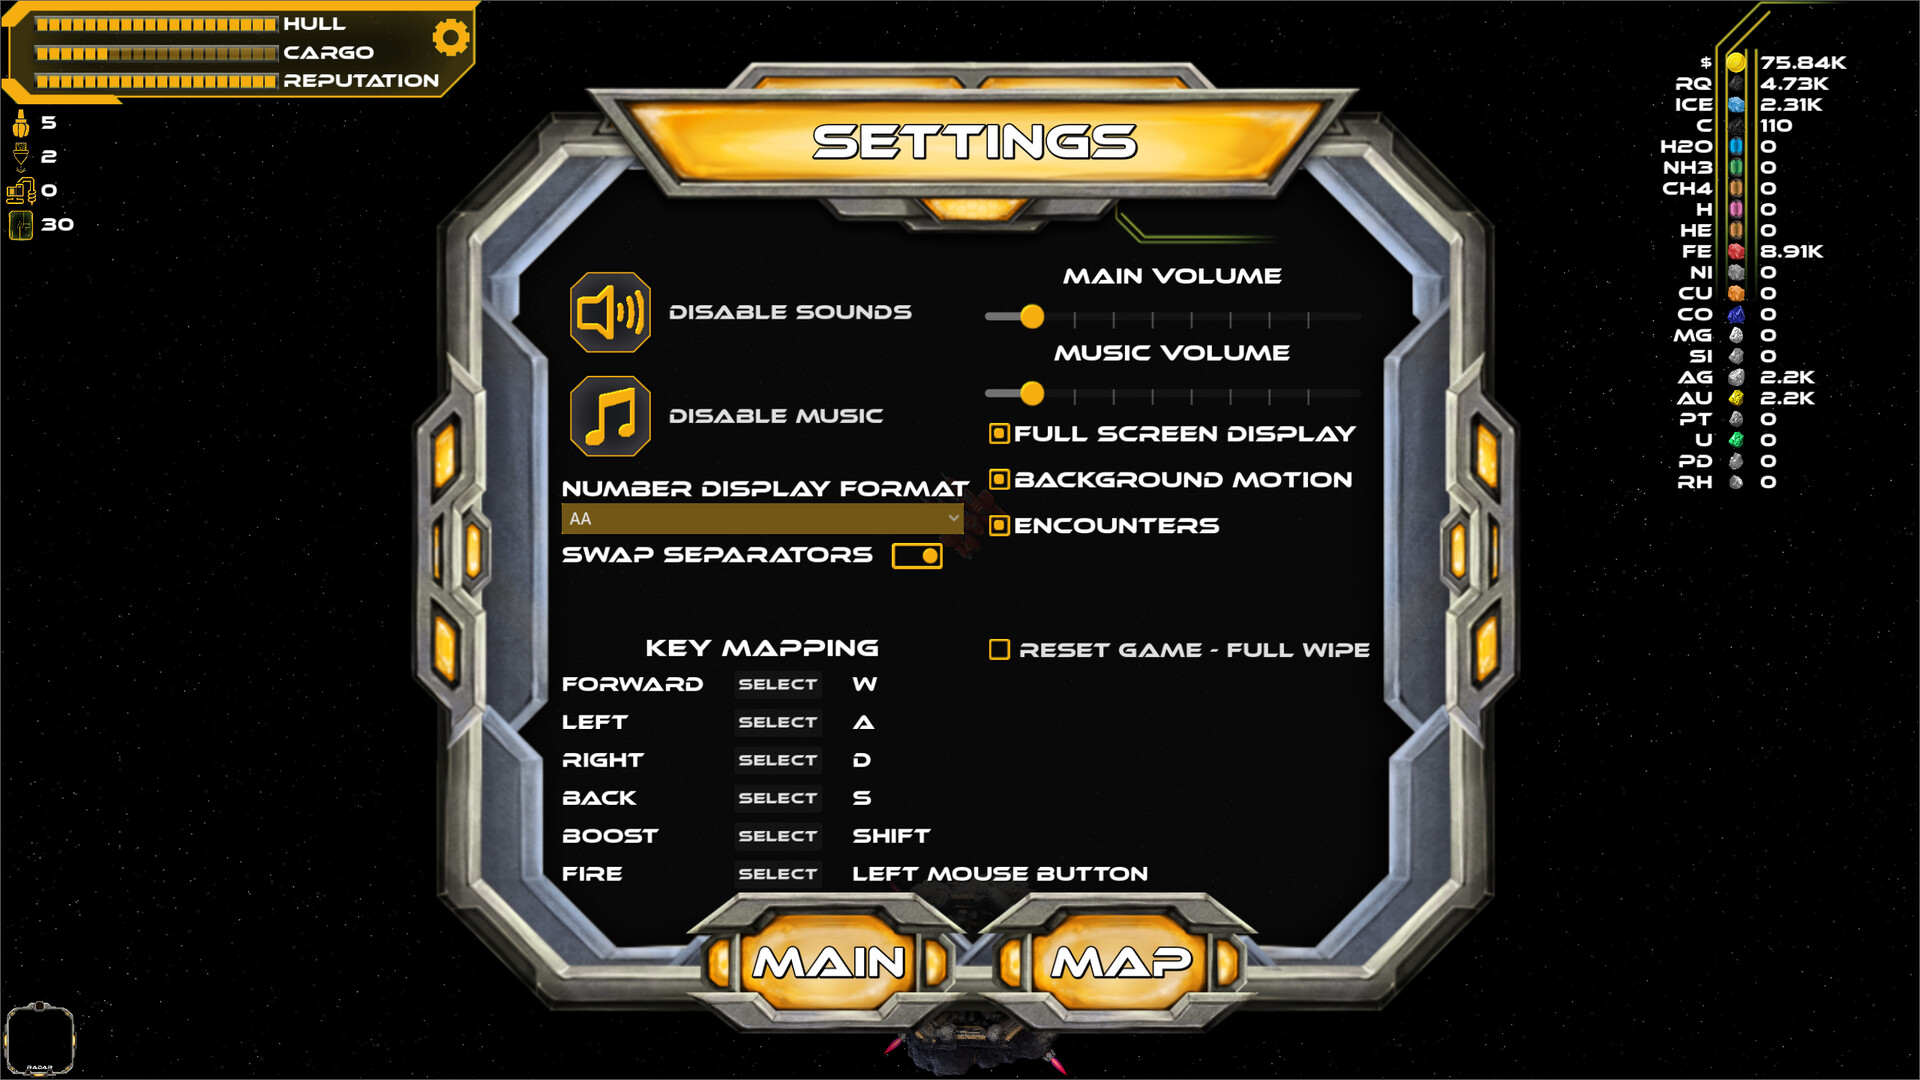 Idle Space Miner: Free PC Game Download